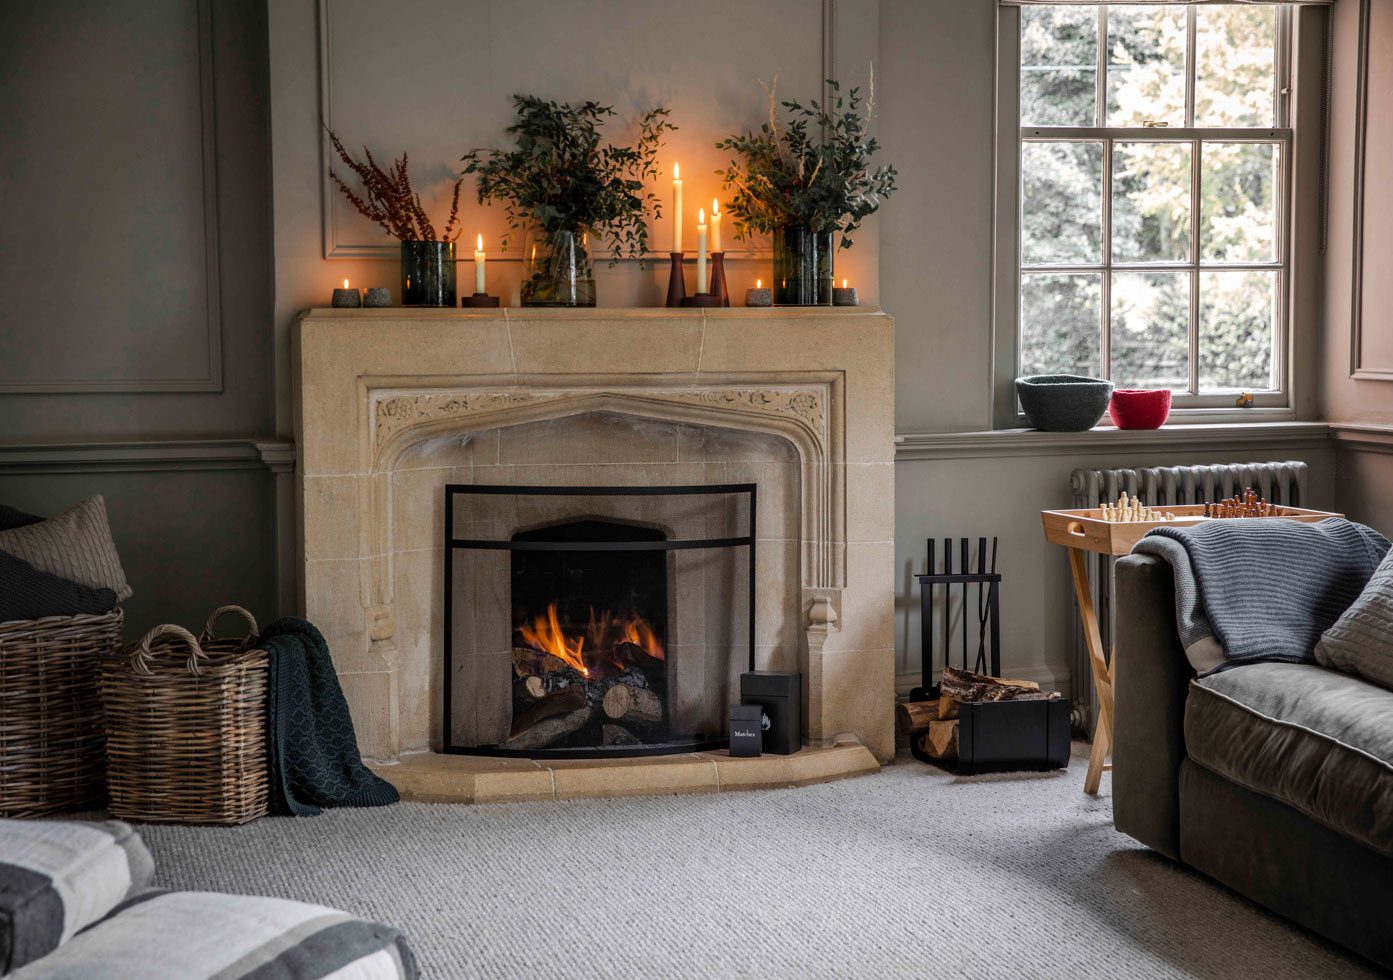 Opening Up A Fireplace Costs Regs And, How Hard Is It To Add A Fireplace An Existing Home